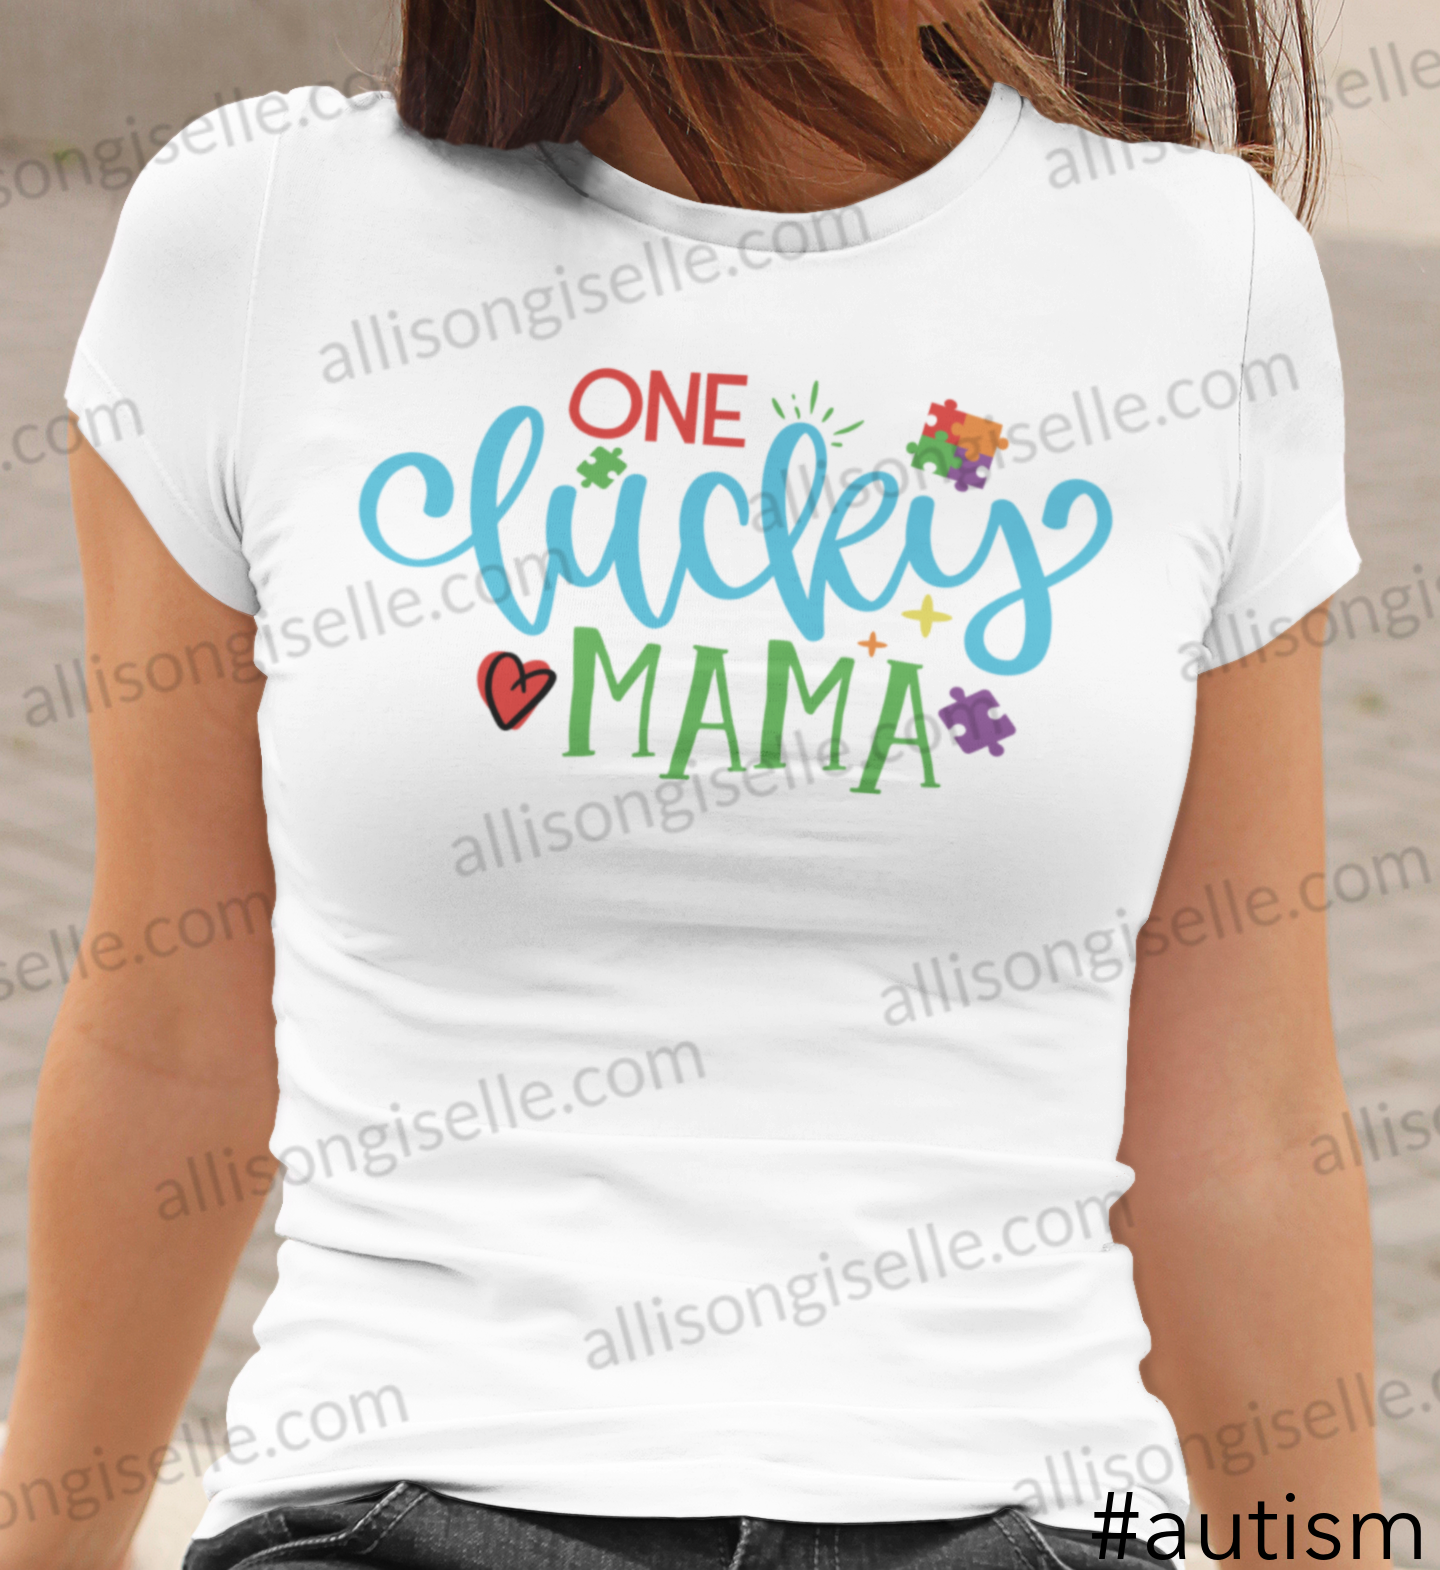 One Lucky Mama Autism Shirt, Adult Autism Awareness shirts, Autism Shirt Adult, Adult Autism Shirt, Autism Awareness Shirt Adult